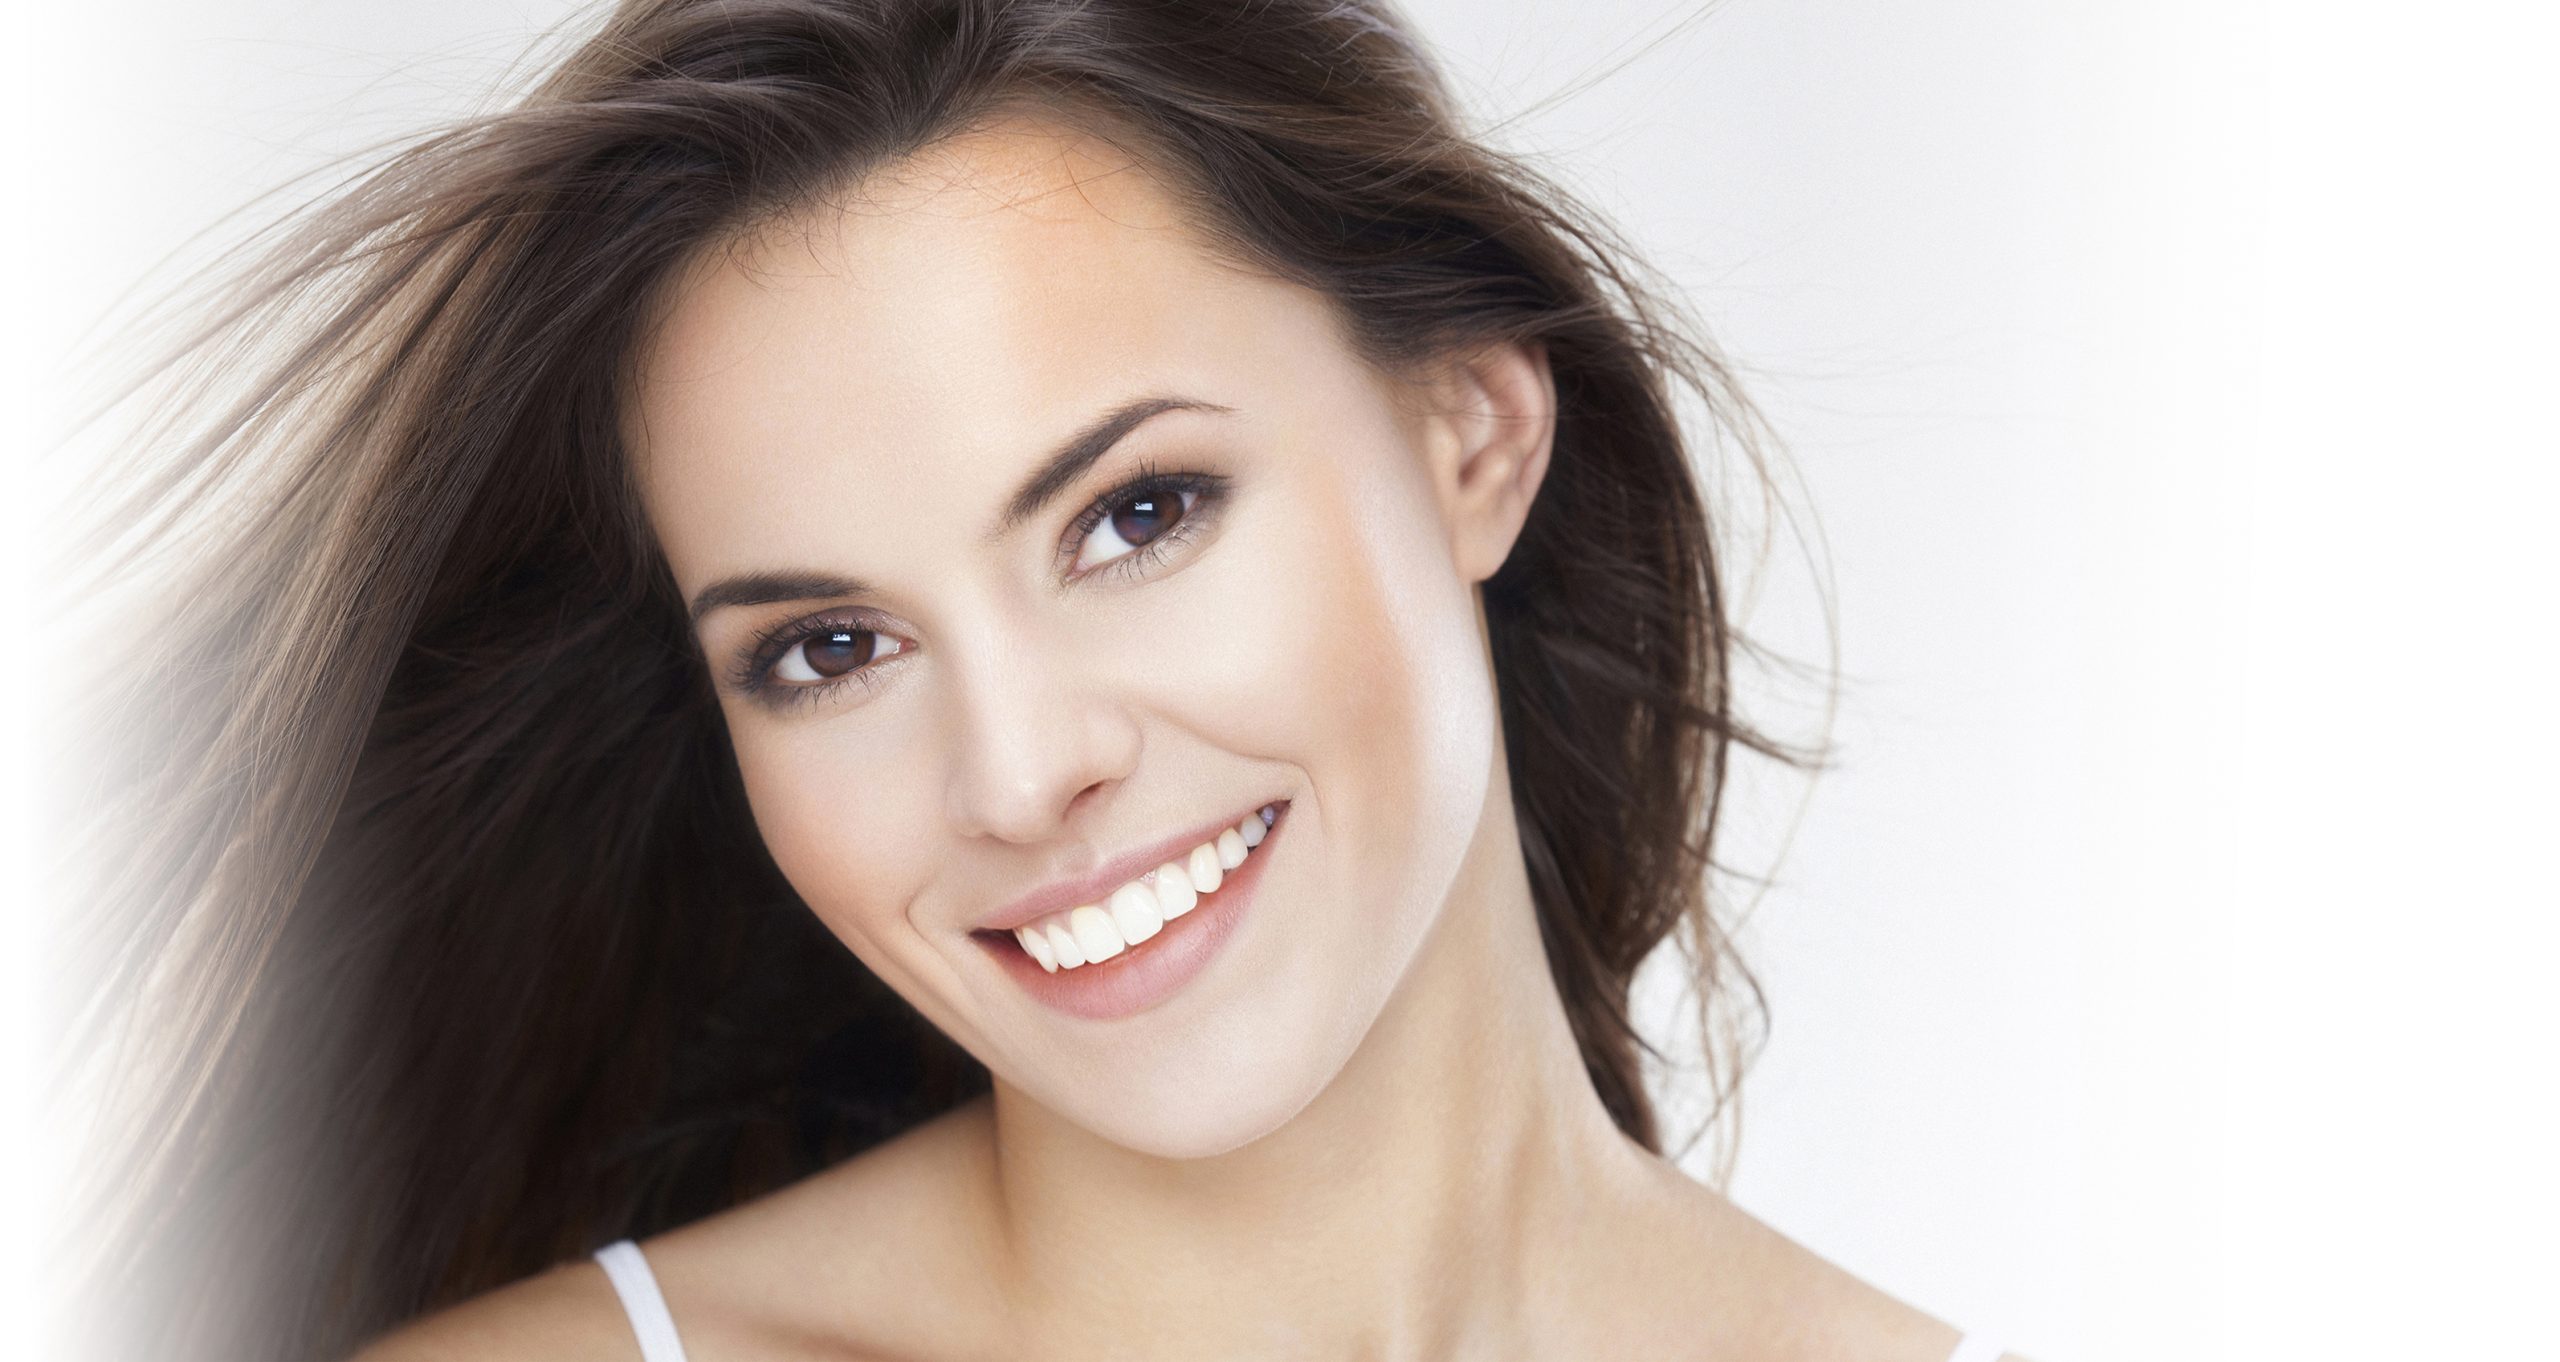 Beauty Portrait Of A Young Brunette Woman With Beautiful Smile